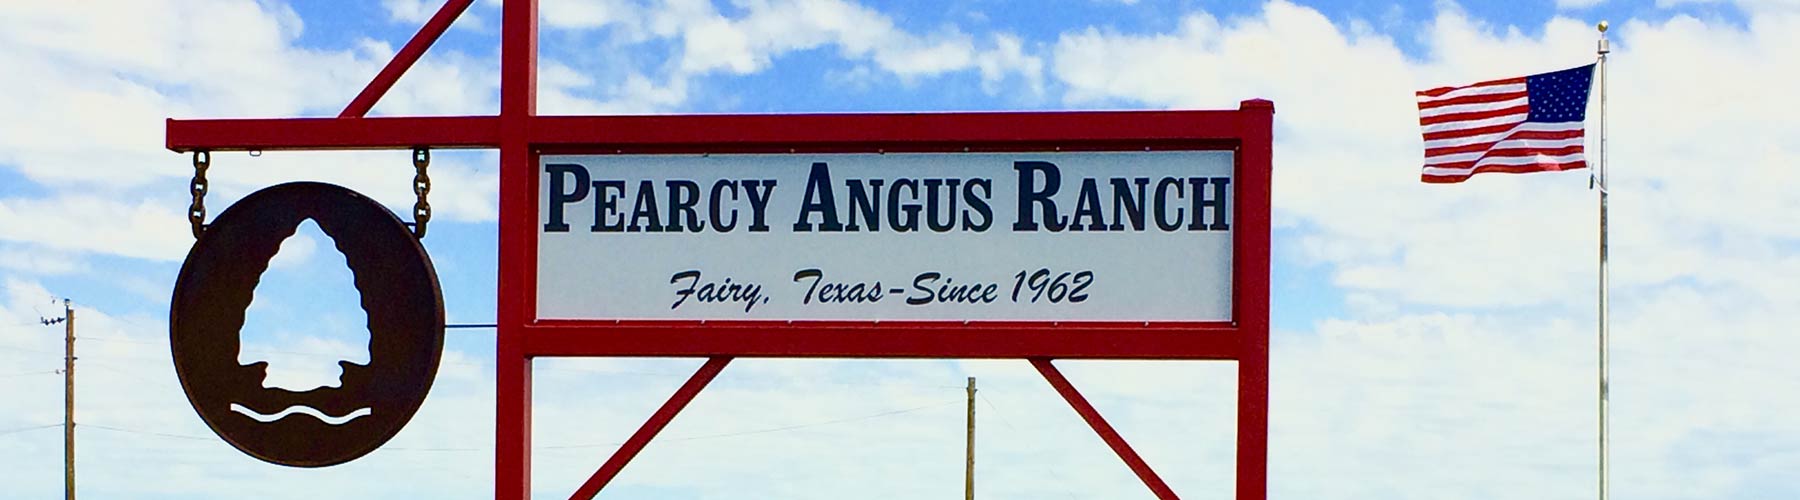 Contact Pearcy Angus Ranch